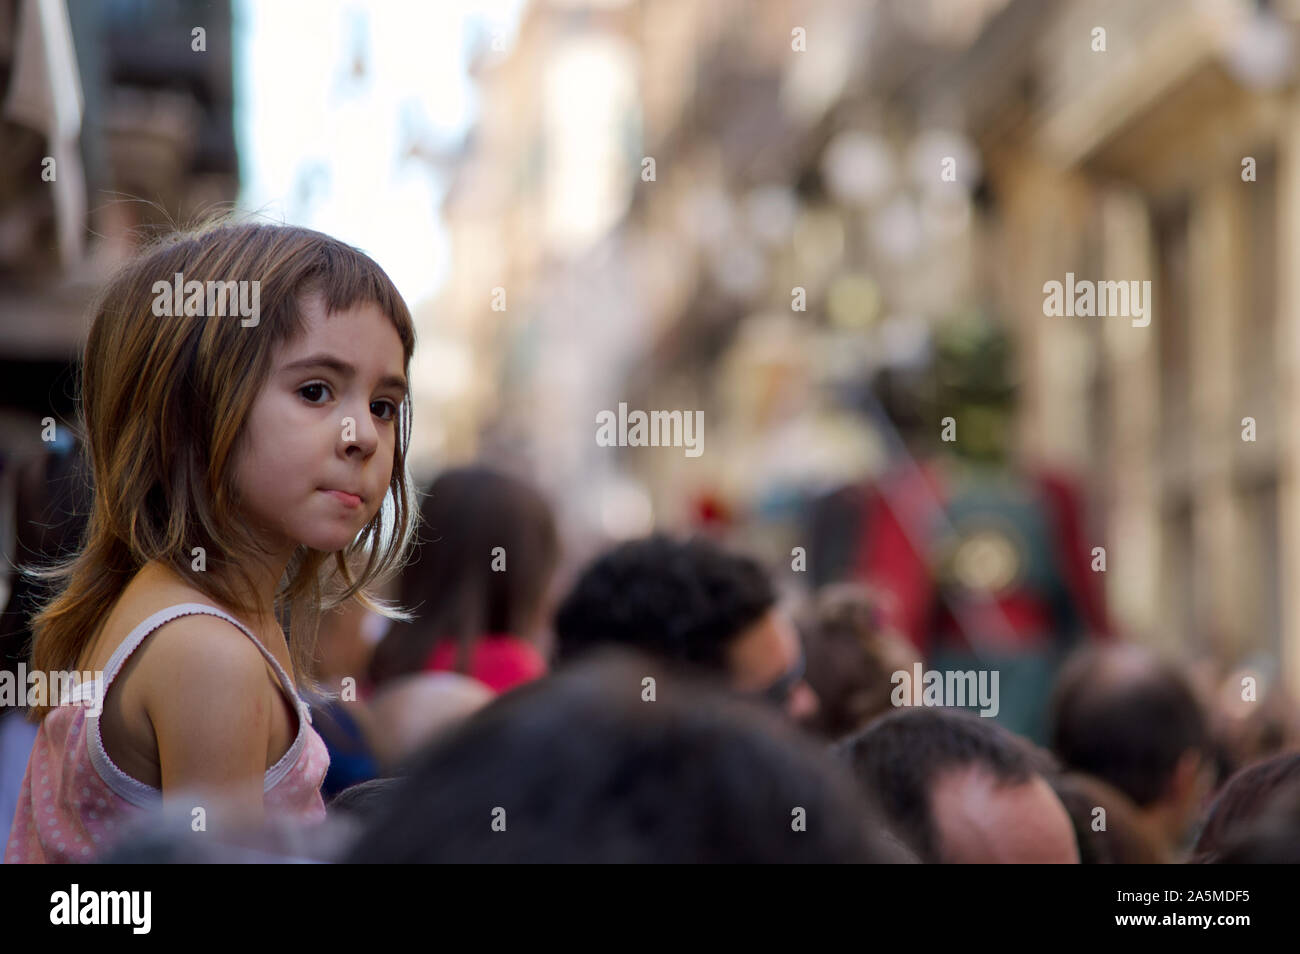 A girl watching the Giants Parade during La Merce Festival 2019 at Placa de Sant Jaume in Barcelona, Spain Stock Photo